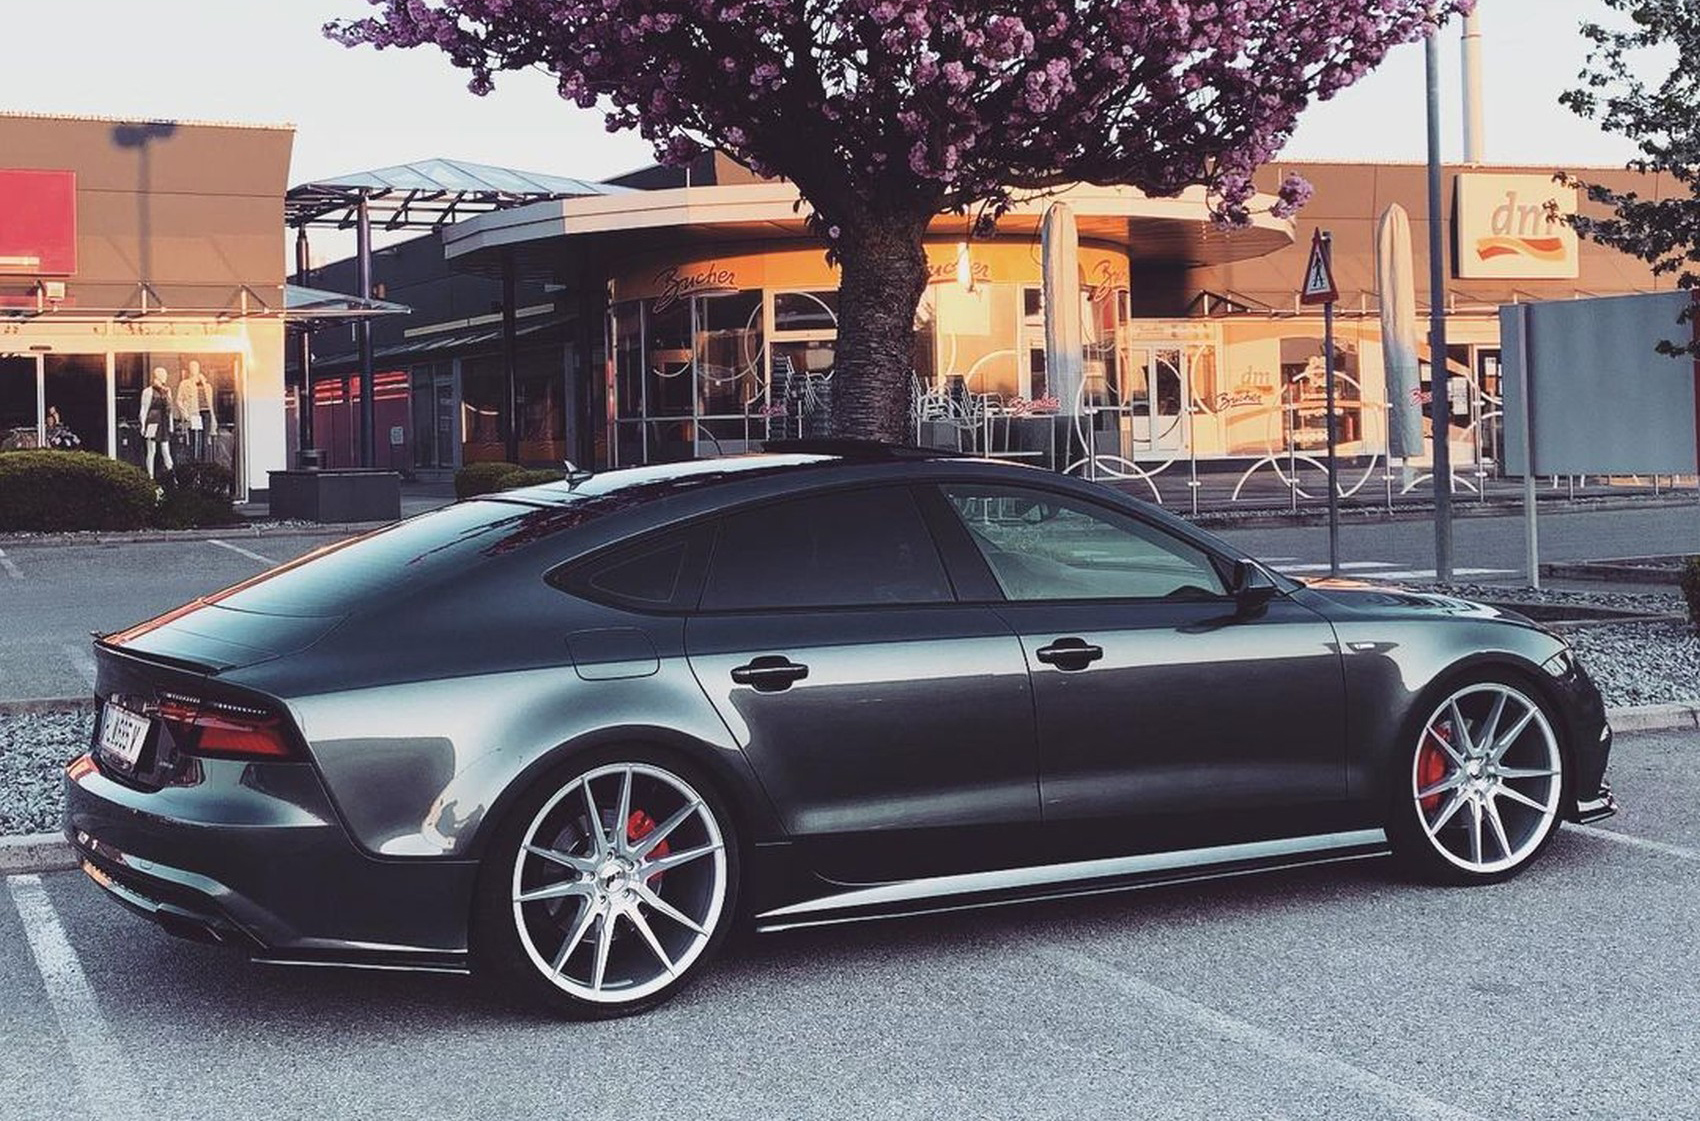 AUDI A7 / S7 / RS7 - VEHICLE GALLERY